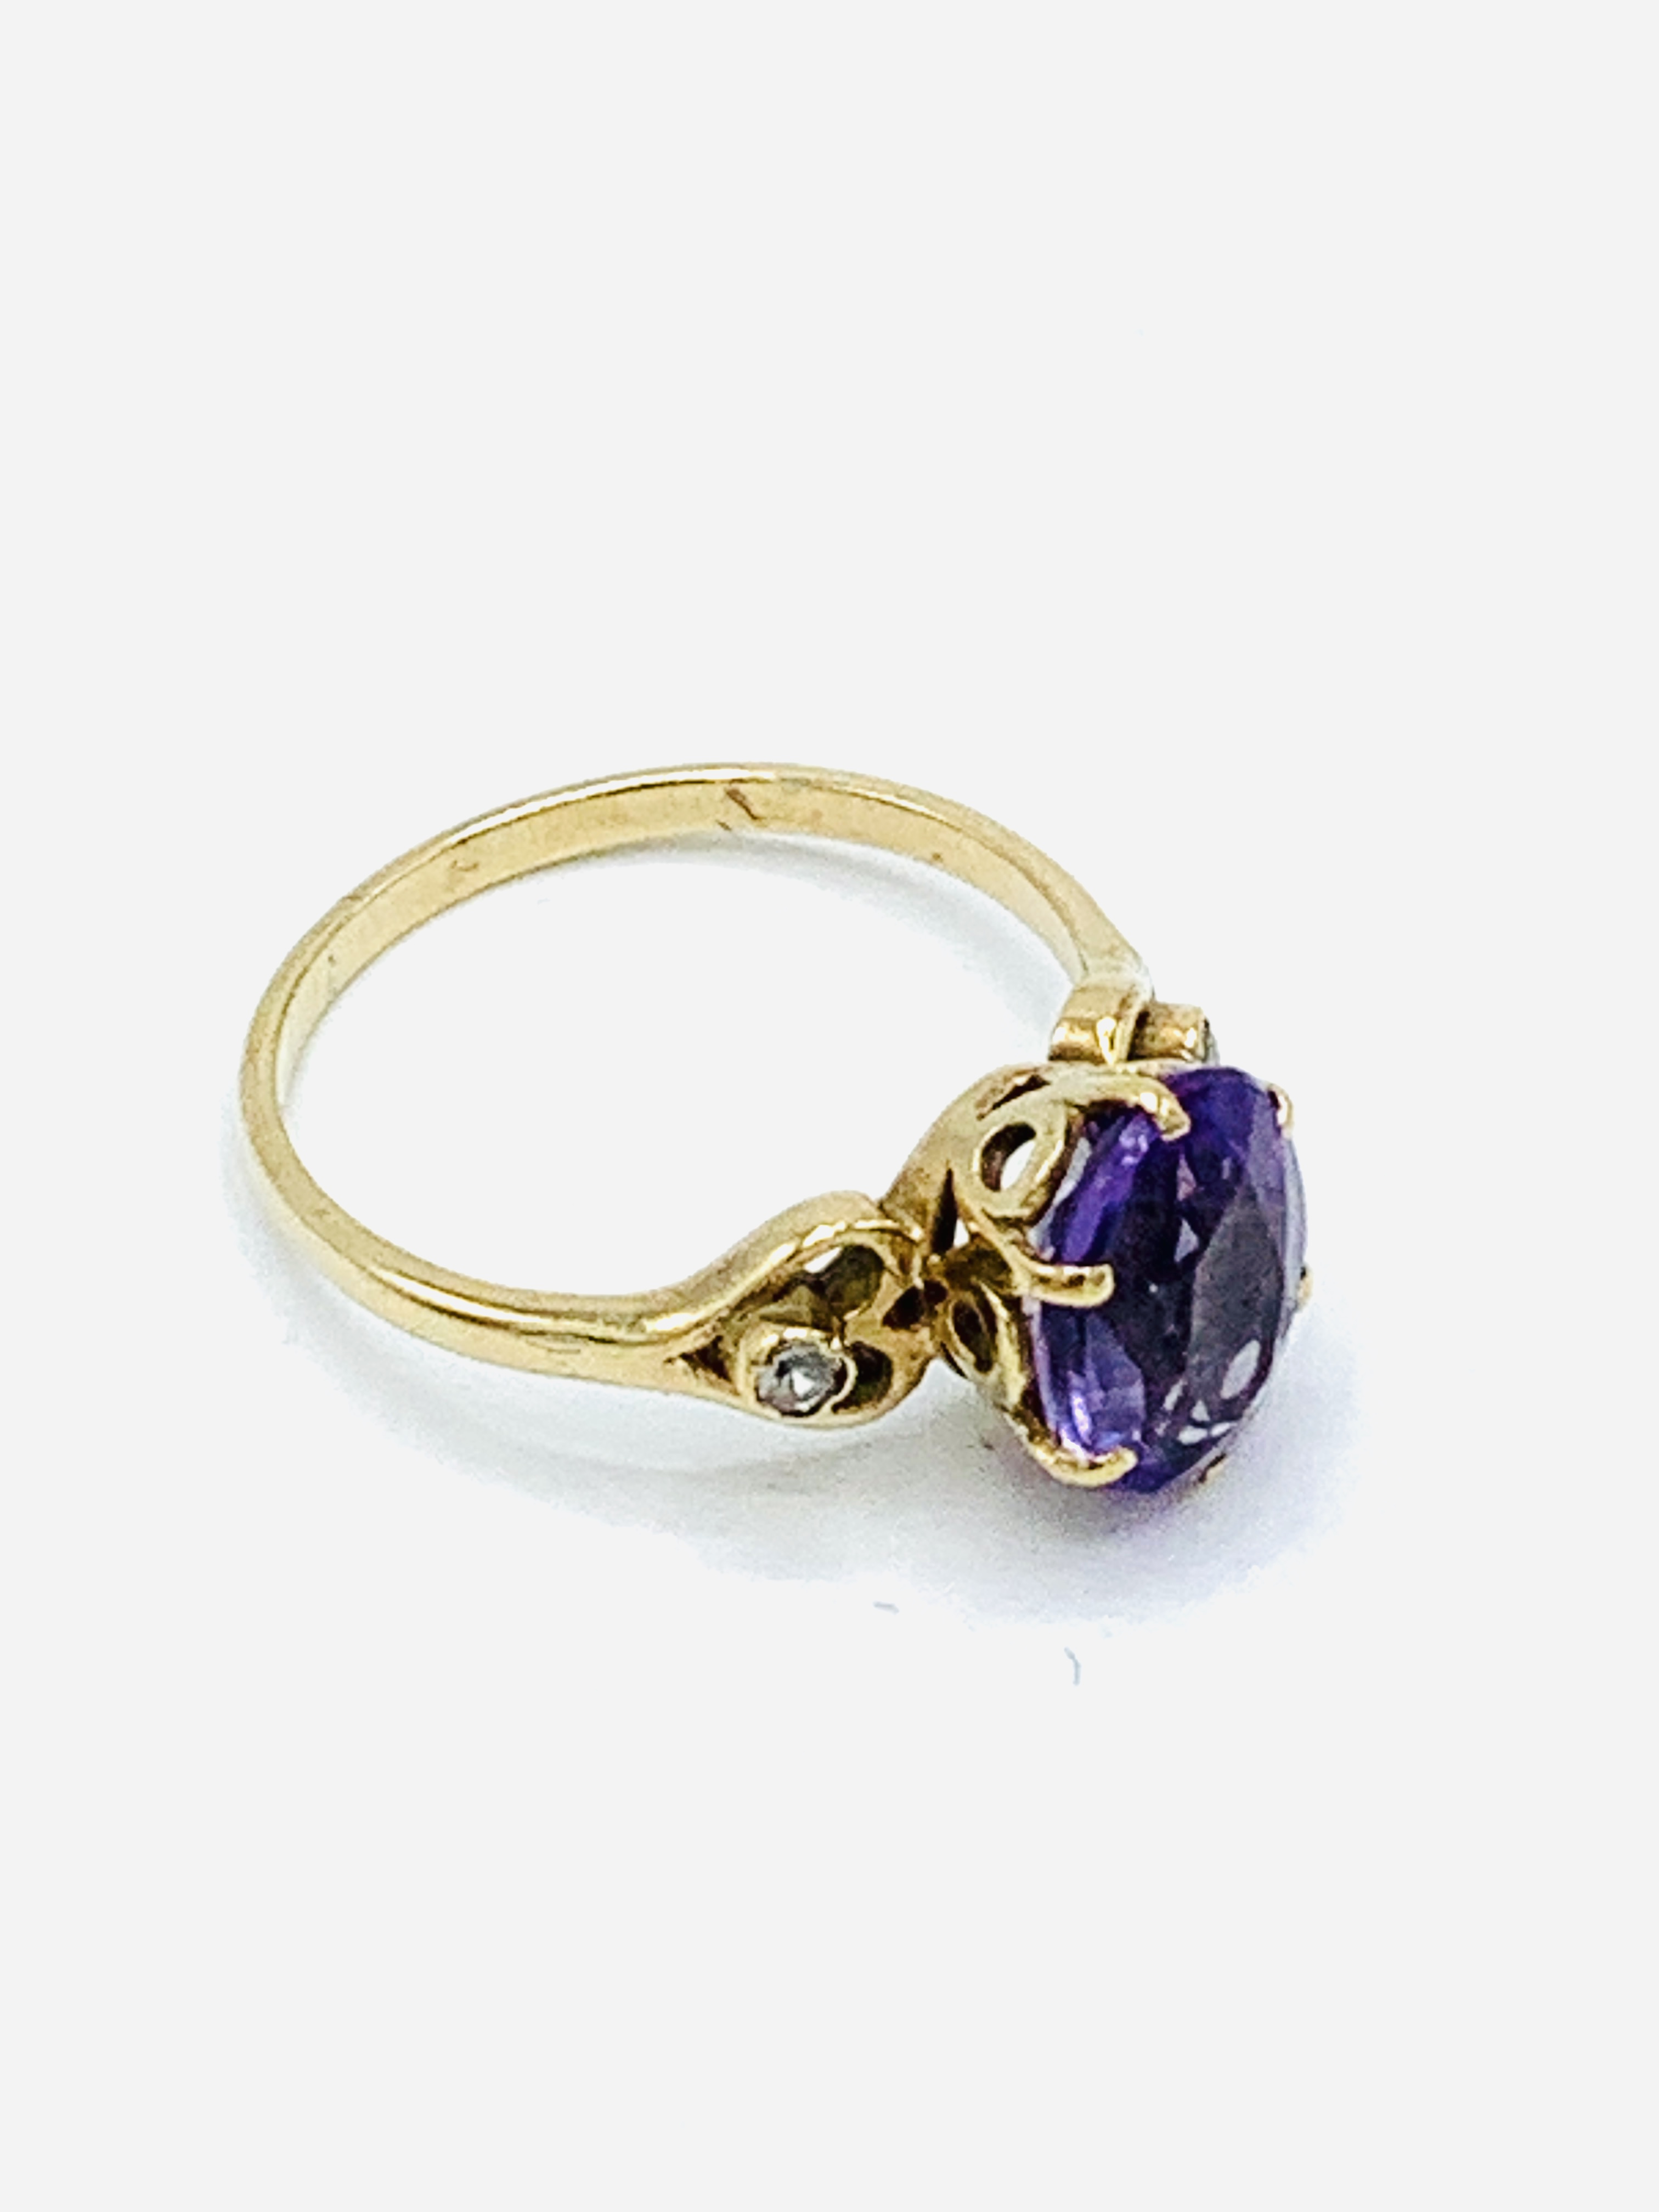 9ct gold amethyst and diamond ring. - Image 2 of 3